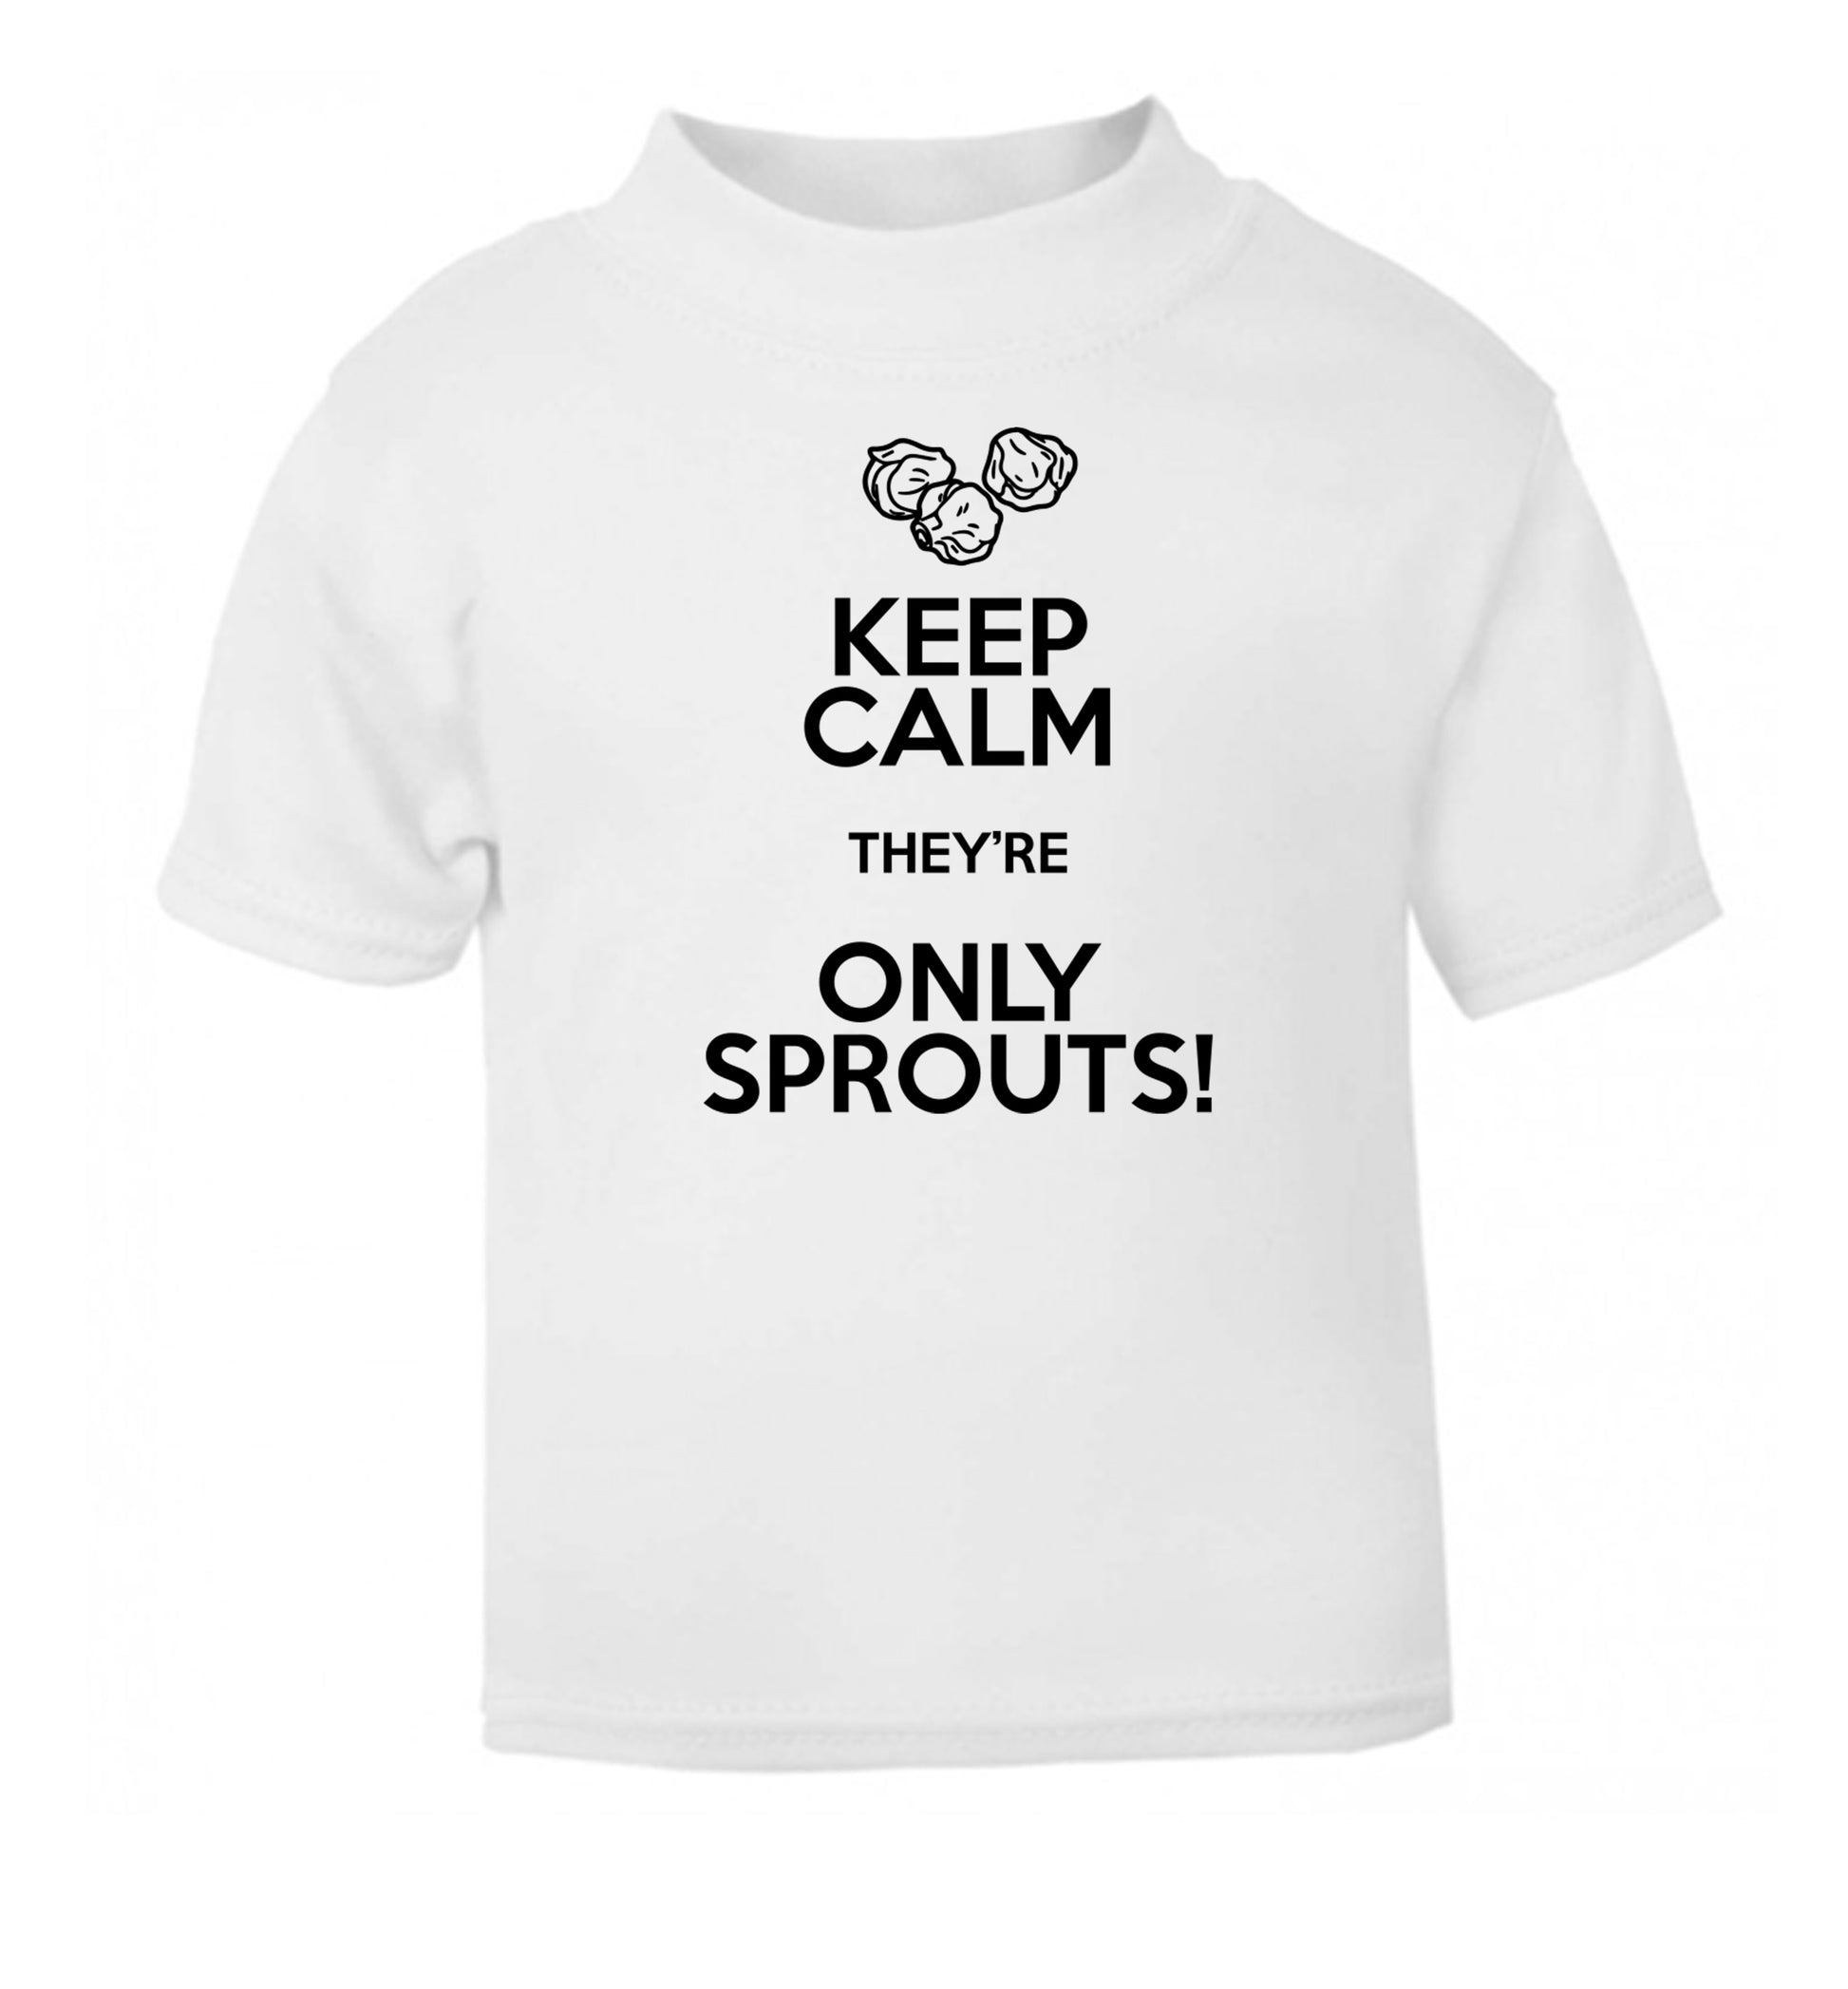 Keep calm they're only sprouts white Baby Toddler Tshirt 2 Years